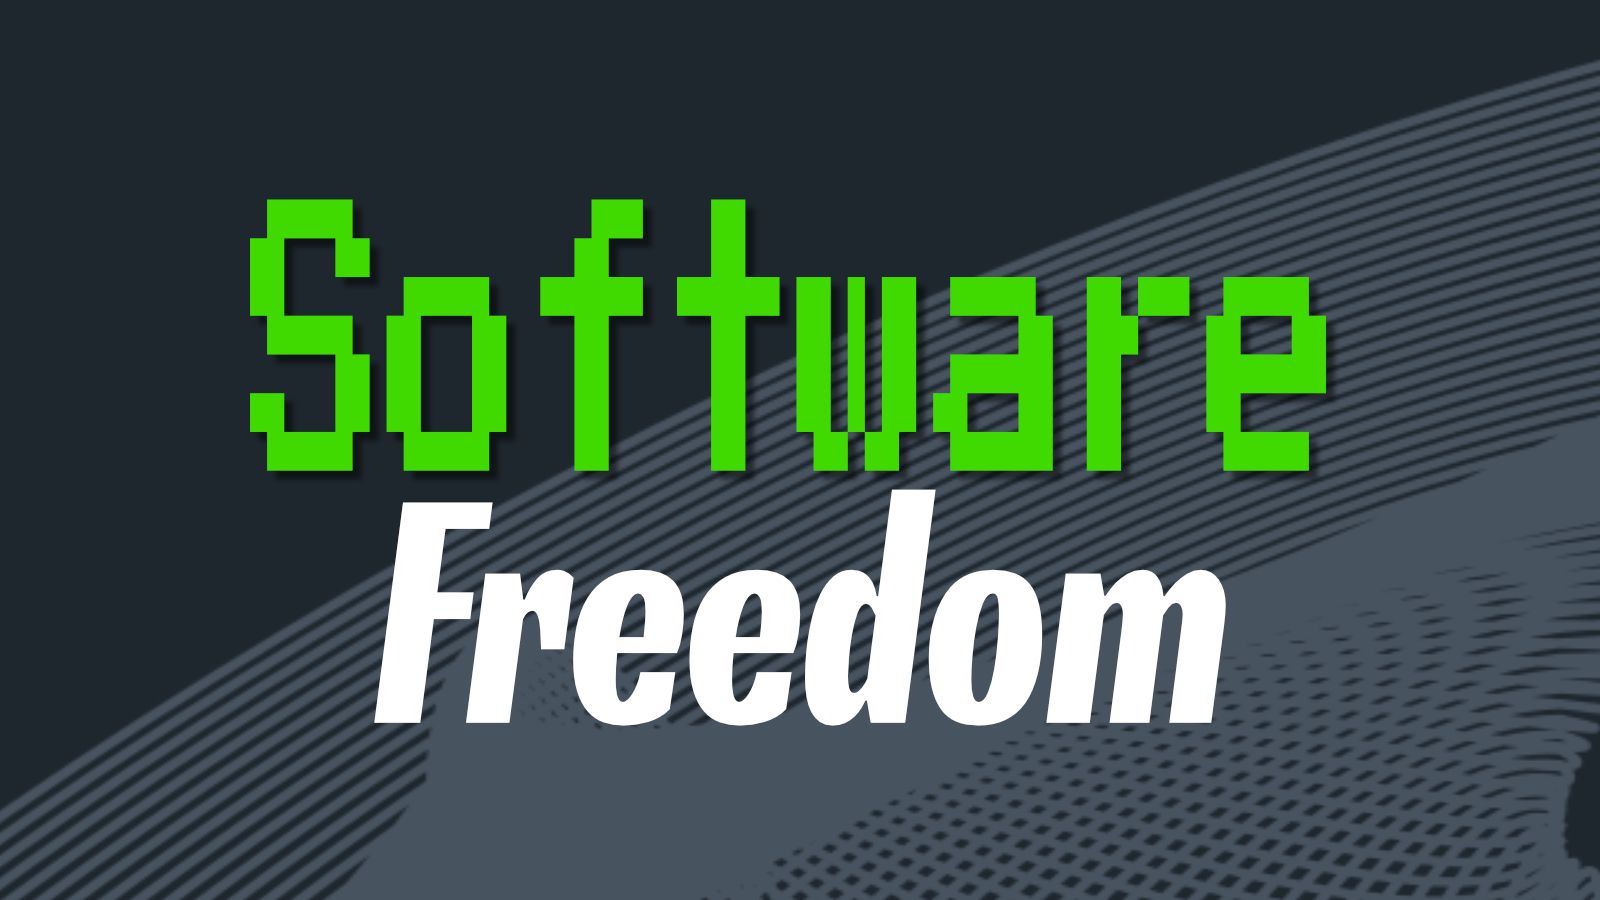 Software Freedom text over gray and blue background